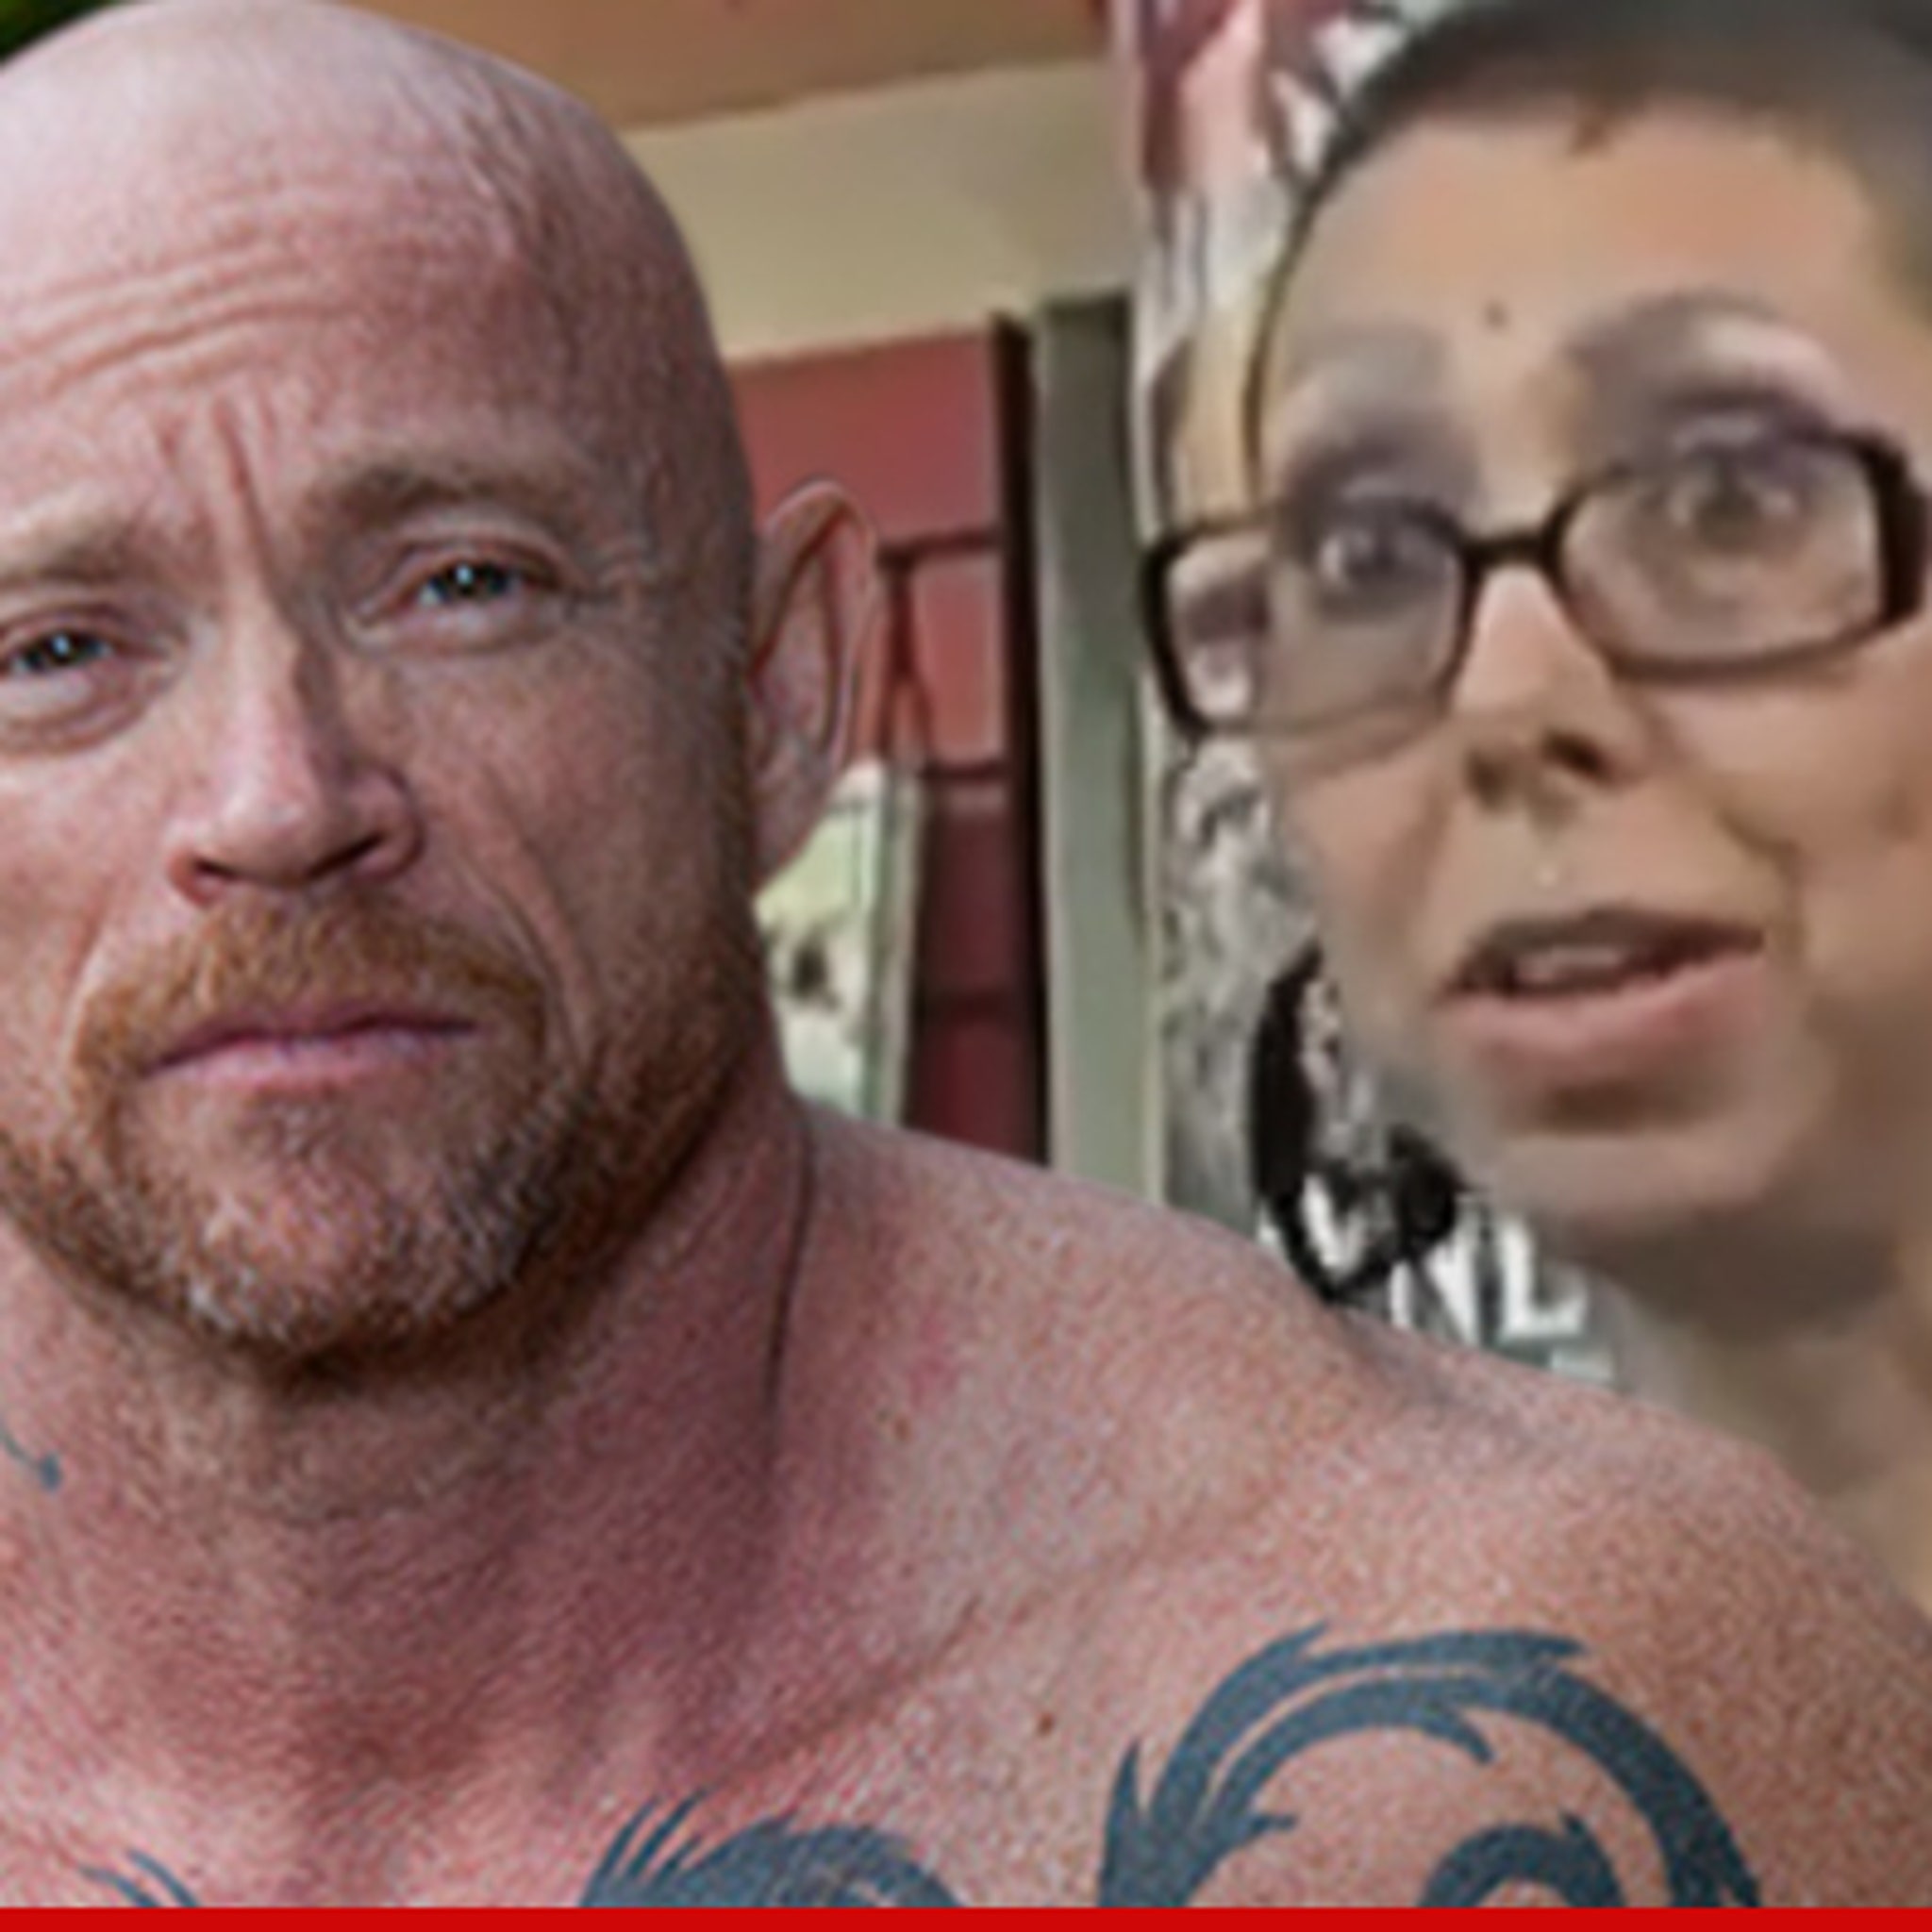 Male Transsexual Porn - Transsexual Porn Star Buck Angel -- I'm a Man, Baby! Now I ...